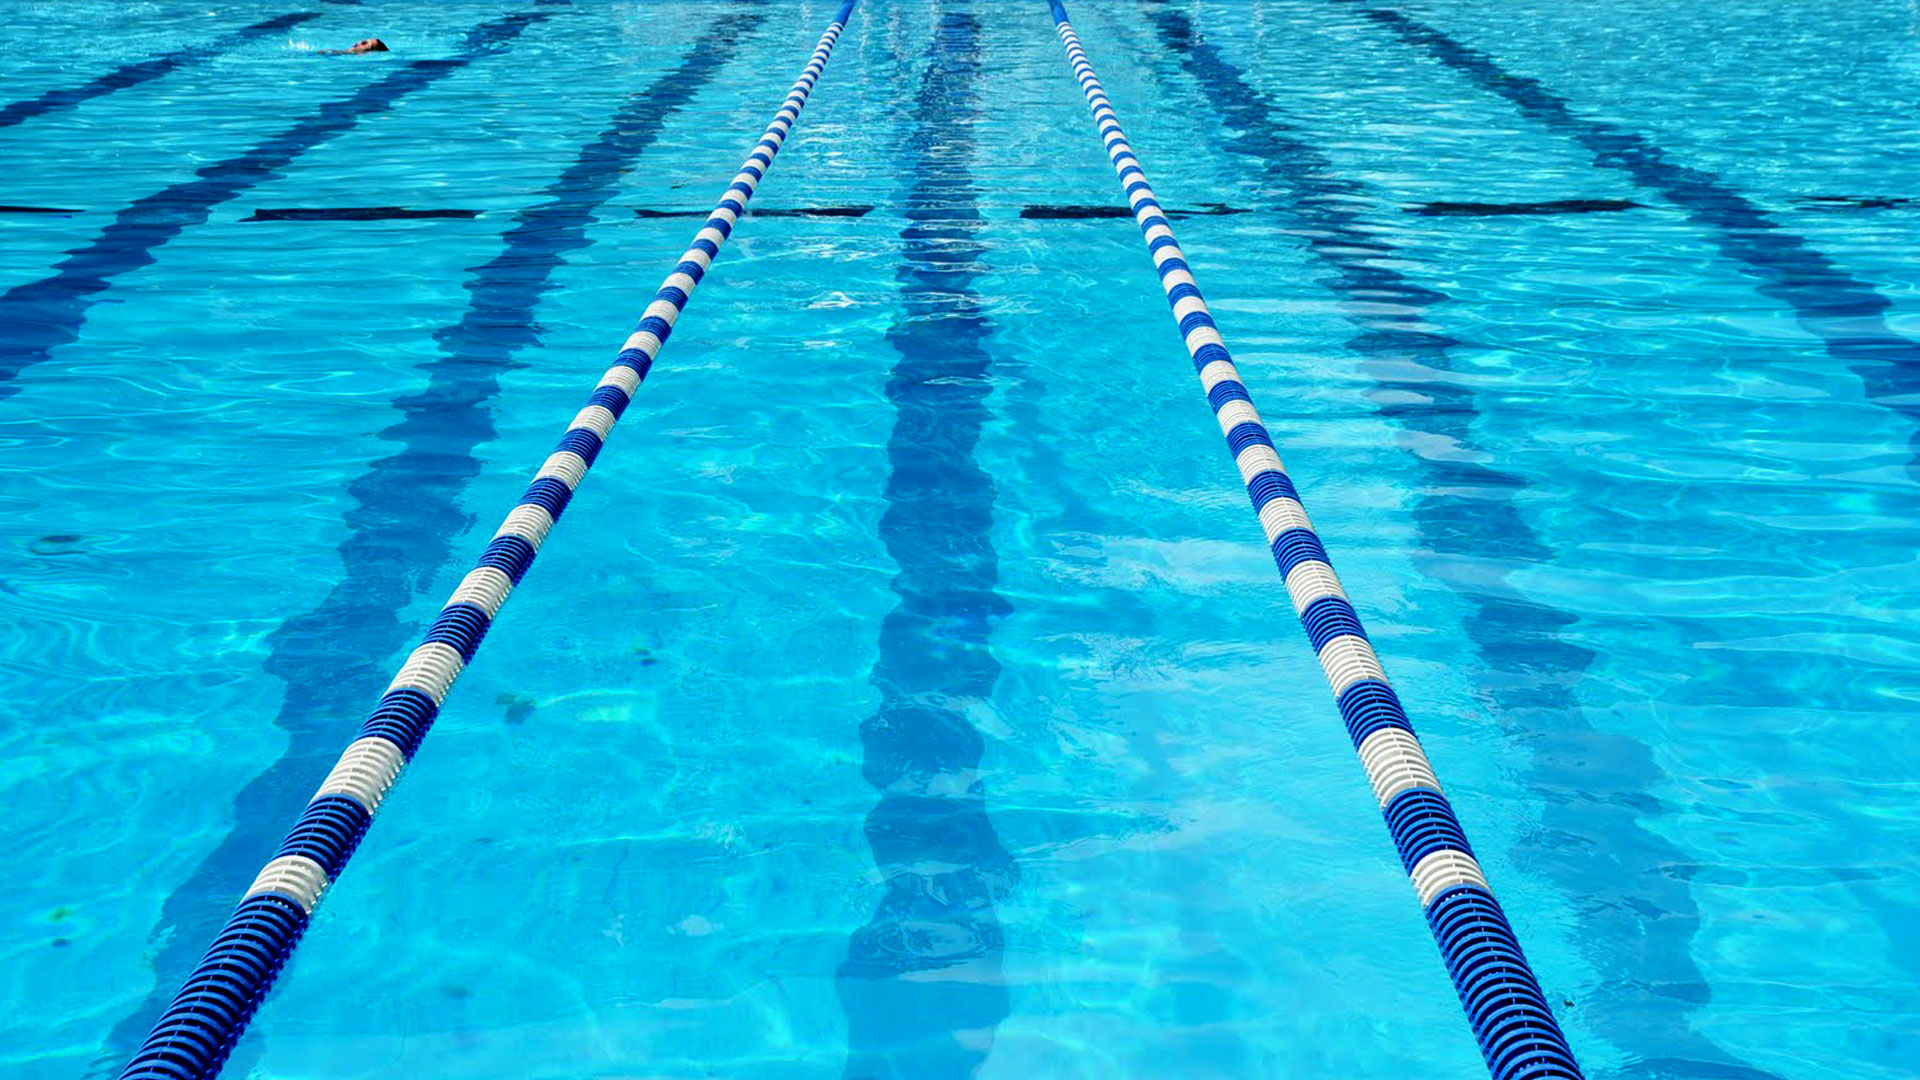 Olympic Swimming Pool Wallpaper - Olympic Swimming Pool Background - HD Wallpaper 